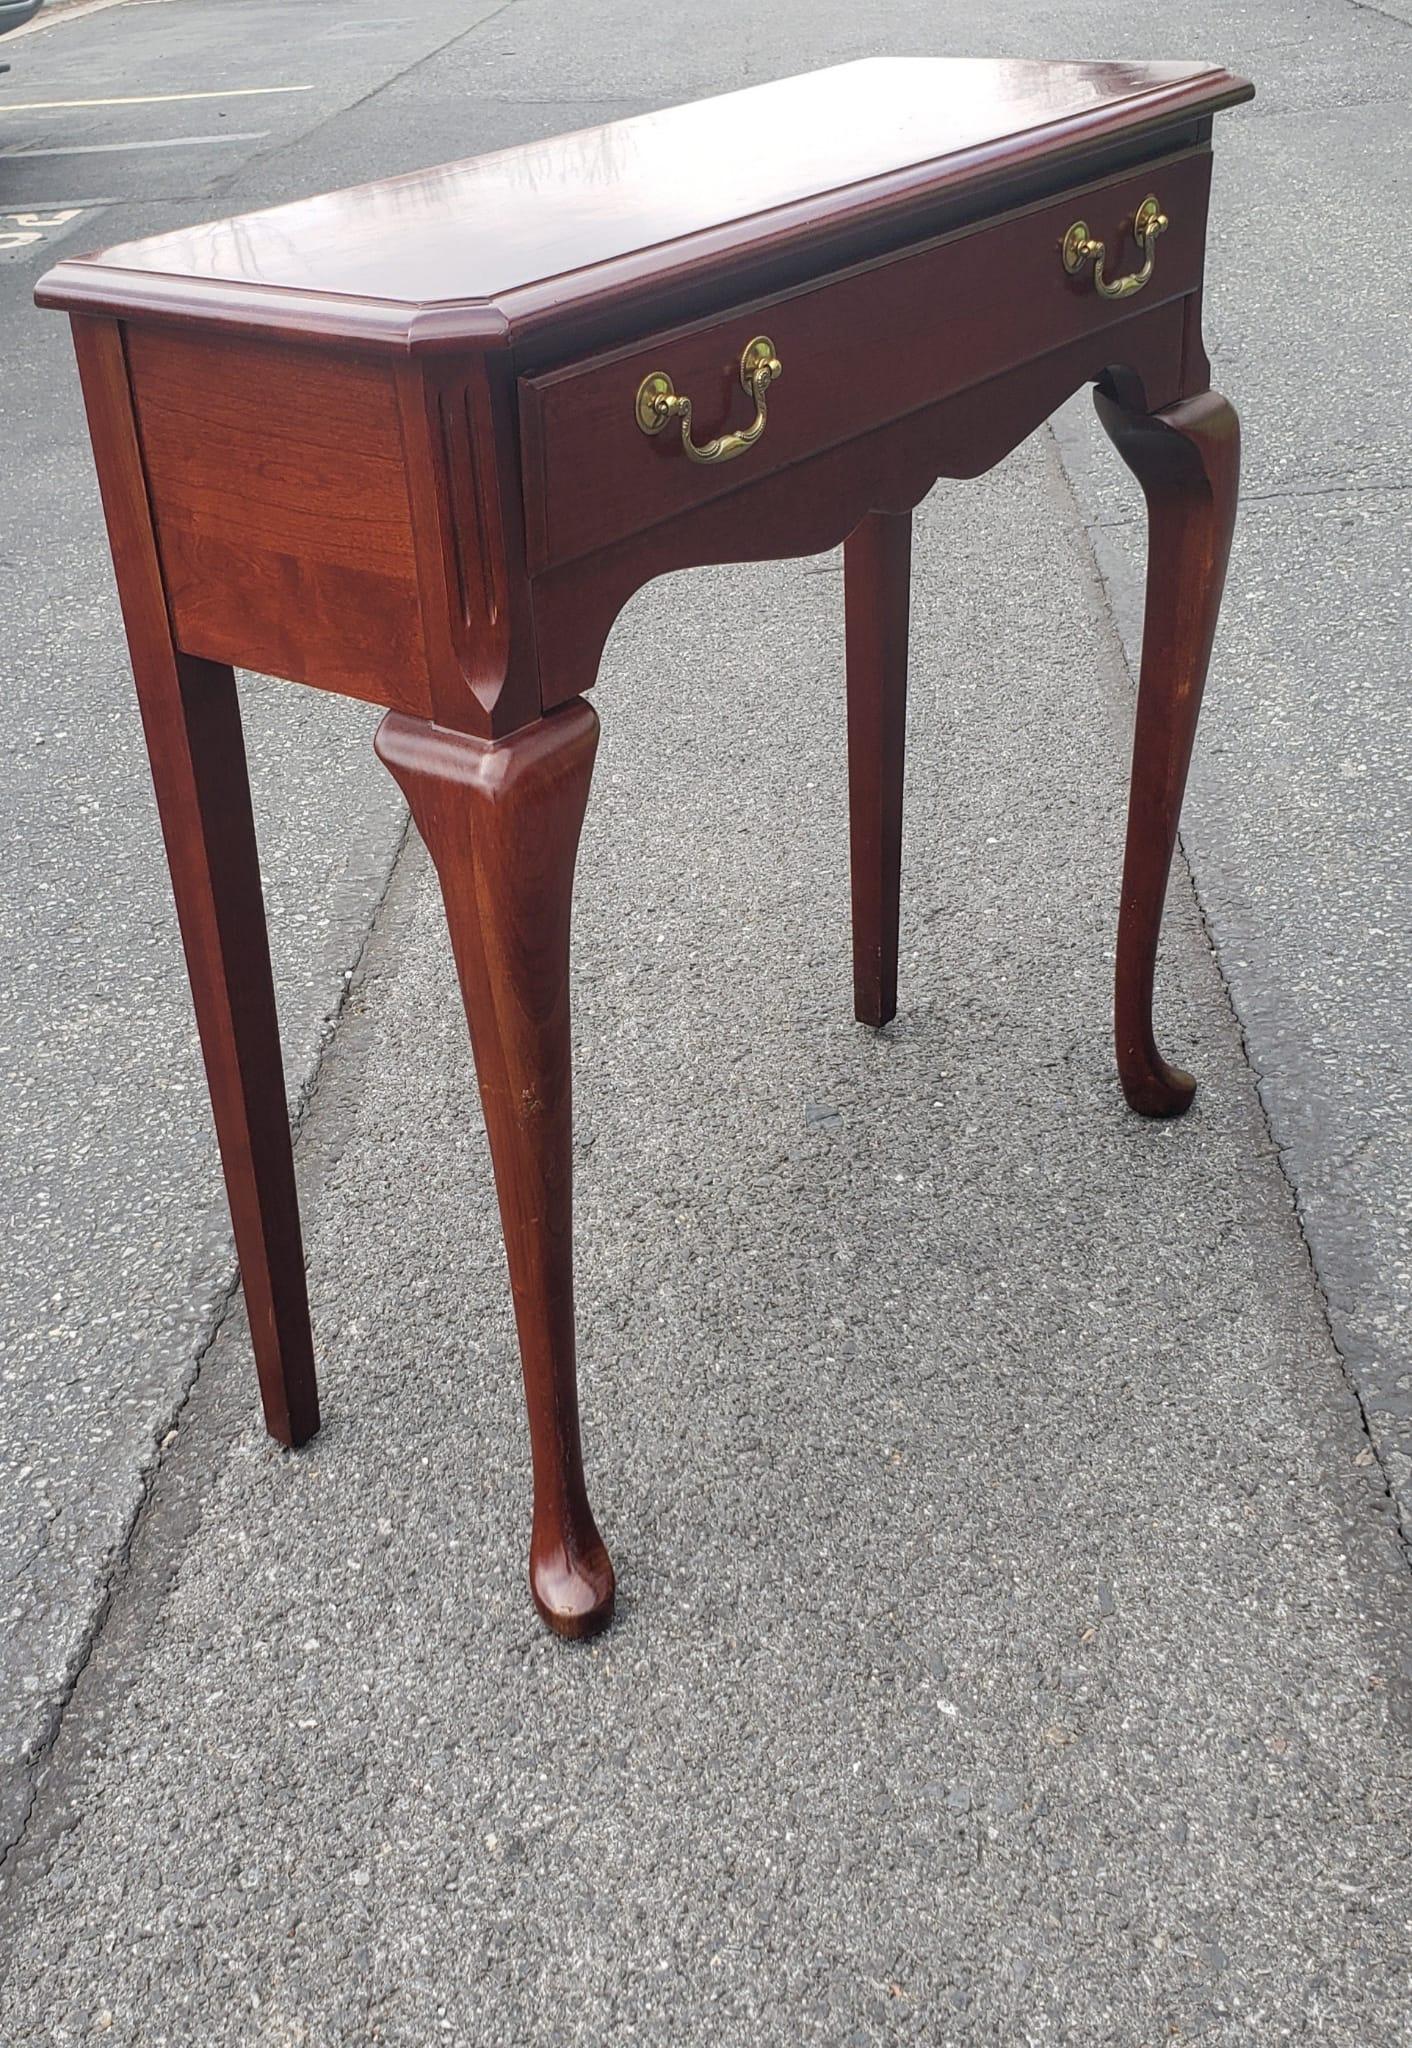 A Late 20th Century Pennsylvania House Cherry Console Table in great vintage condition. Measures 28